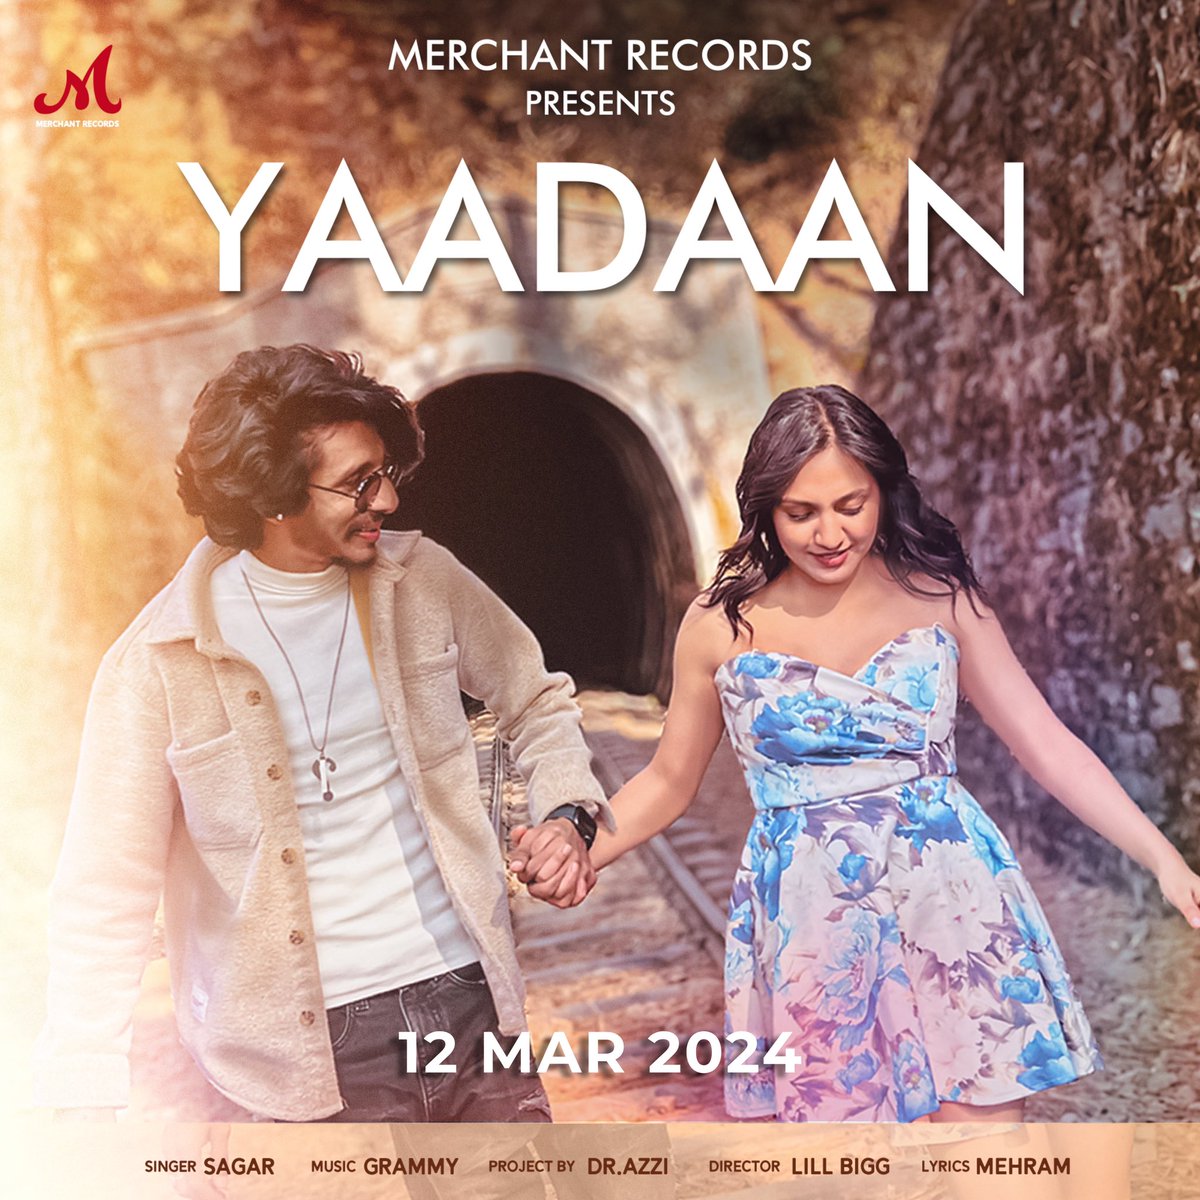 🎶Unveiling #Yaadaan: A symphony of talent! by @SagarSharma Premieres March 12th on @SlimSulaiman’s YouTube channel and all streaming platforms. Don't miss it! #MerchantRecords #SalimSulaiman